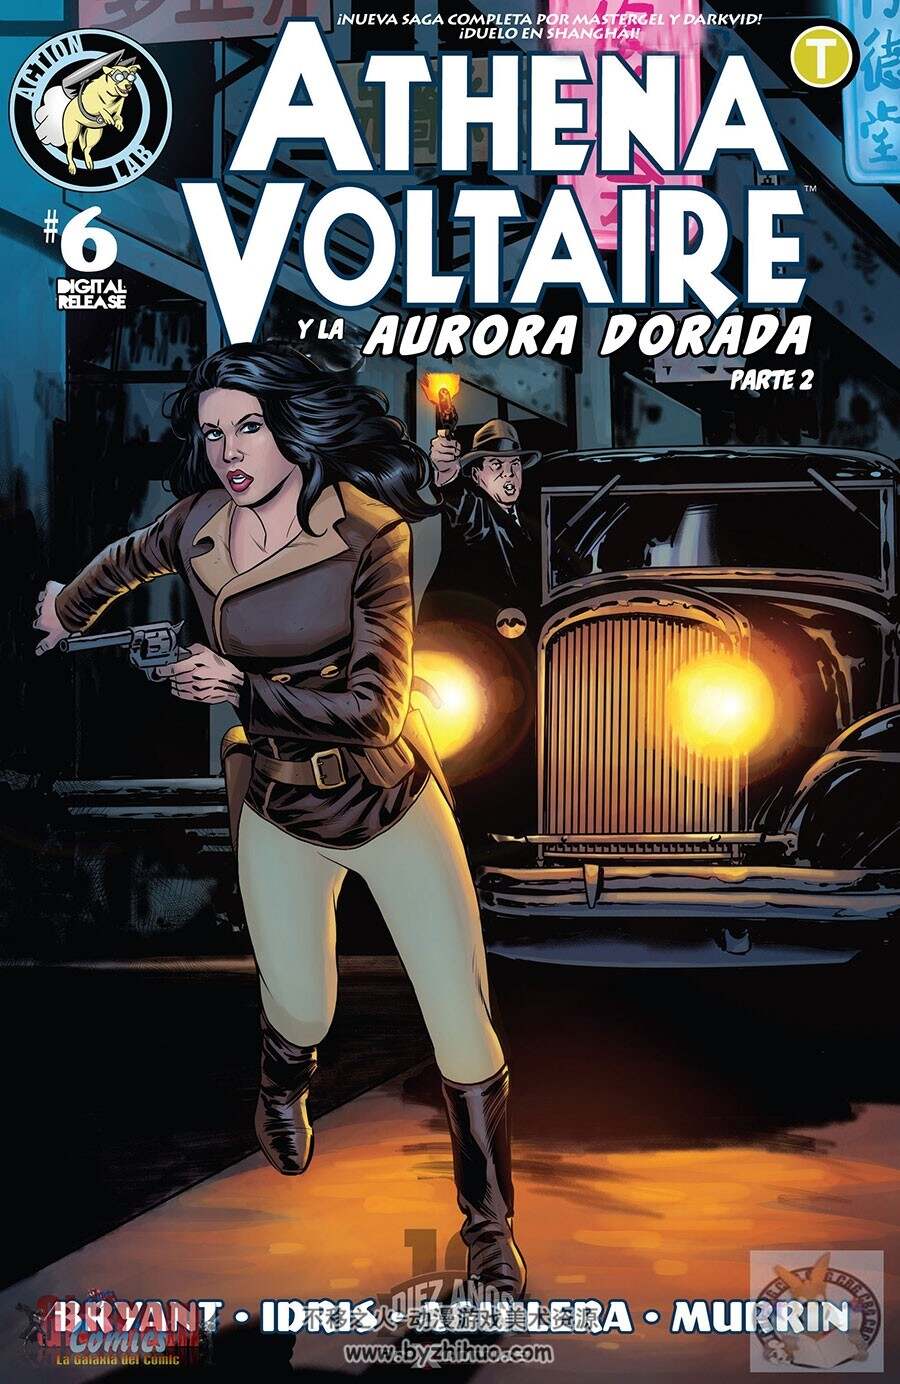 Athena Voltaire 5-8册 Steve Bryant - Chris Murrin - Jason Millet - Ismael Canales